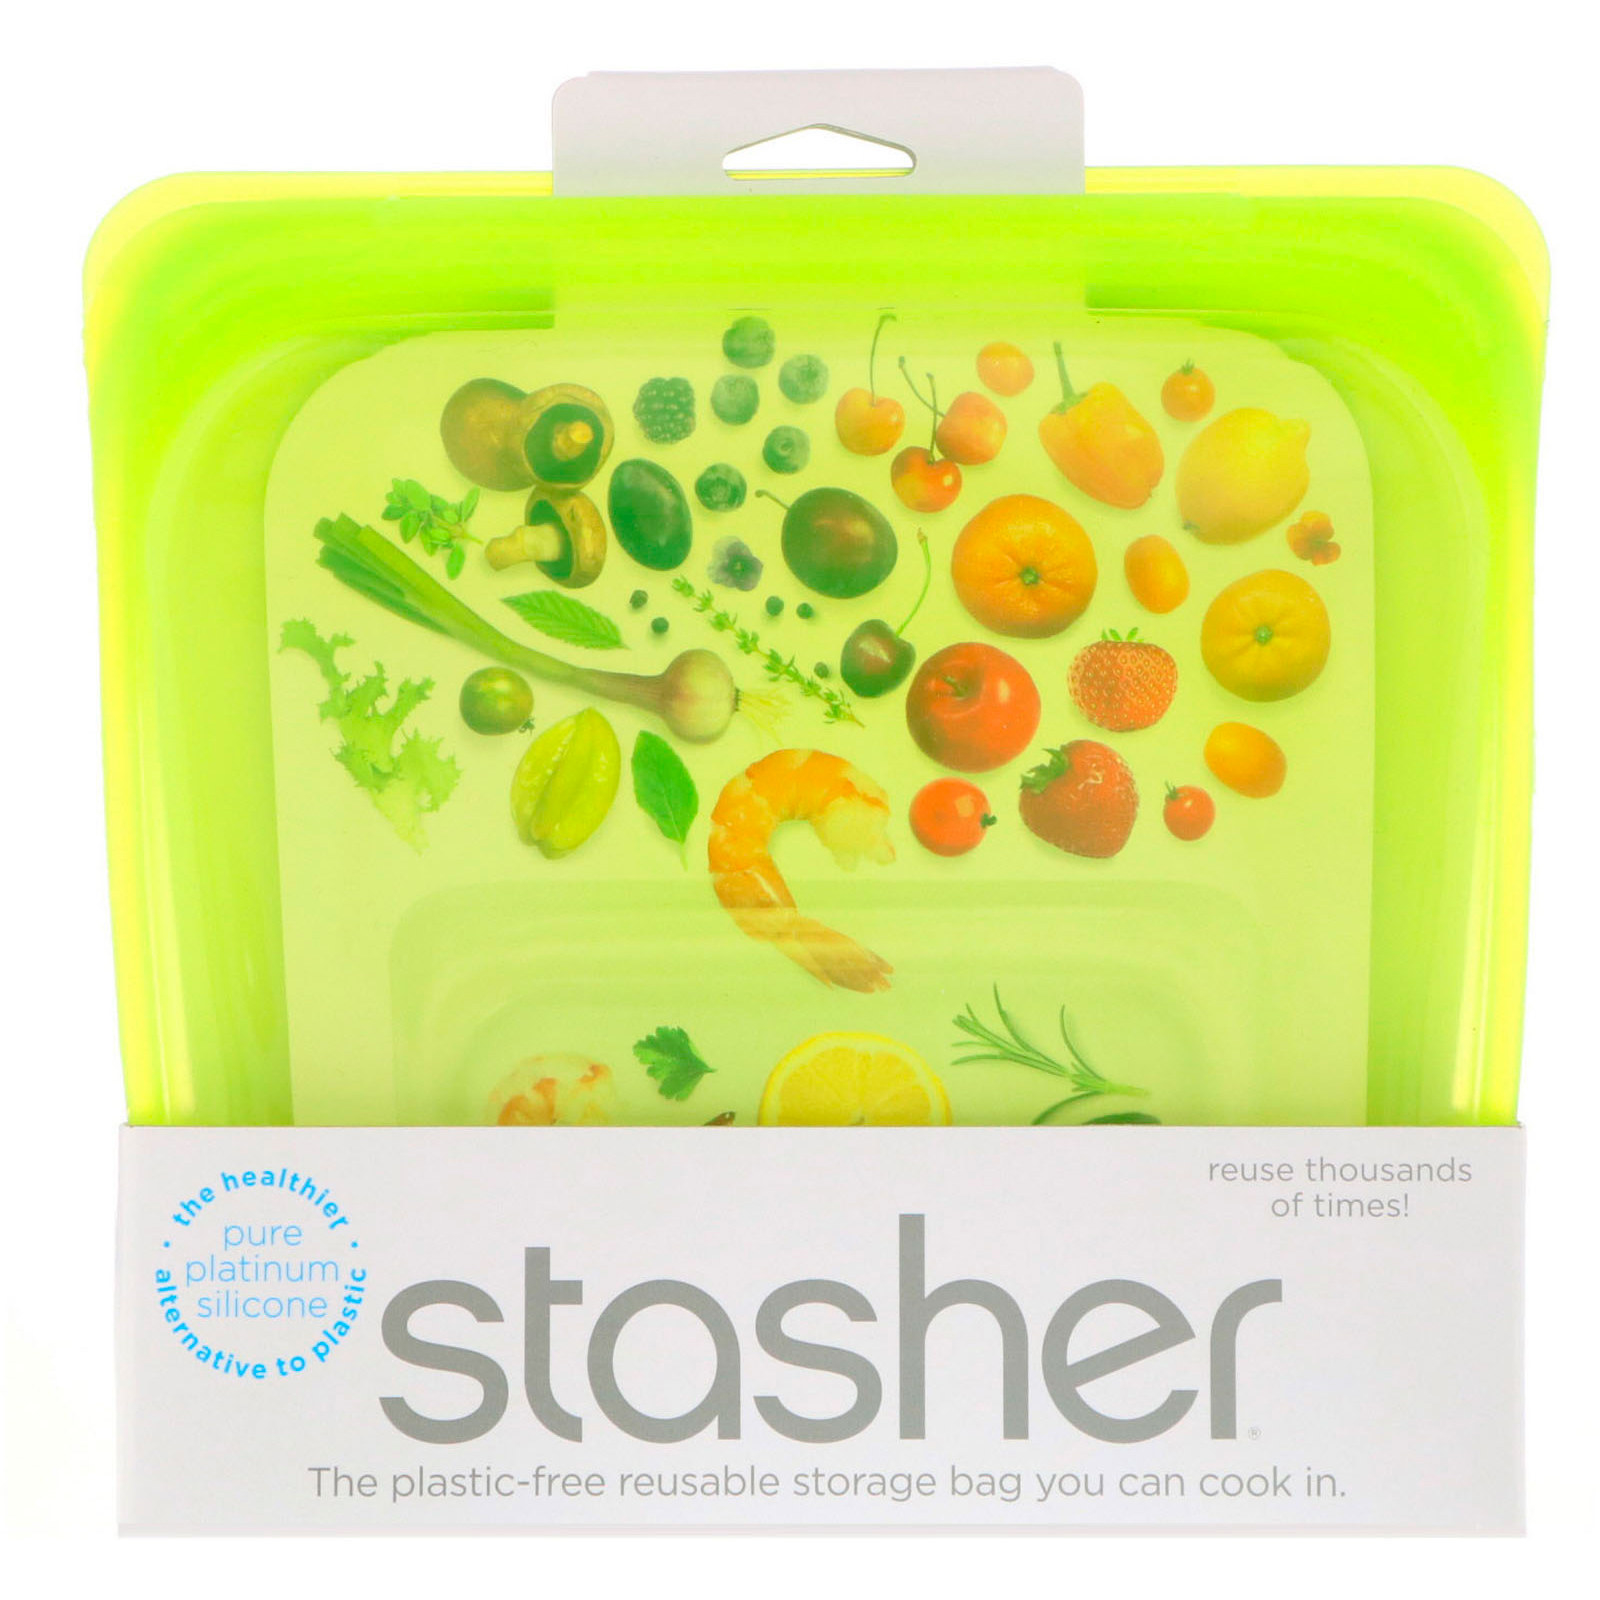 green stasher bag in a package